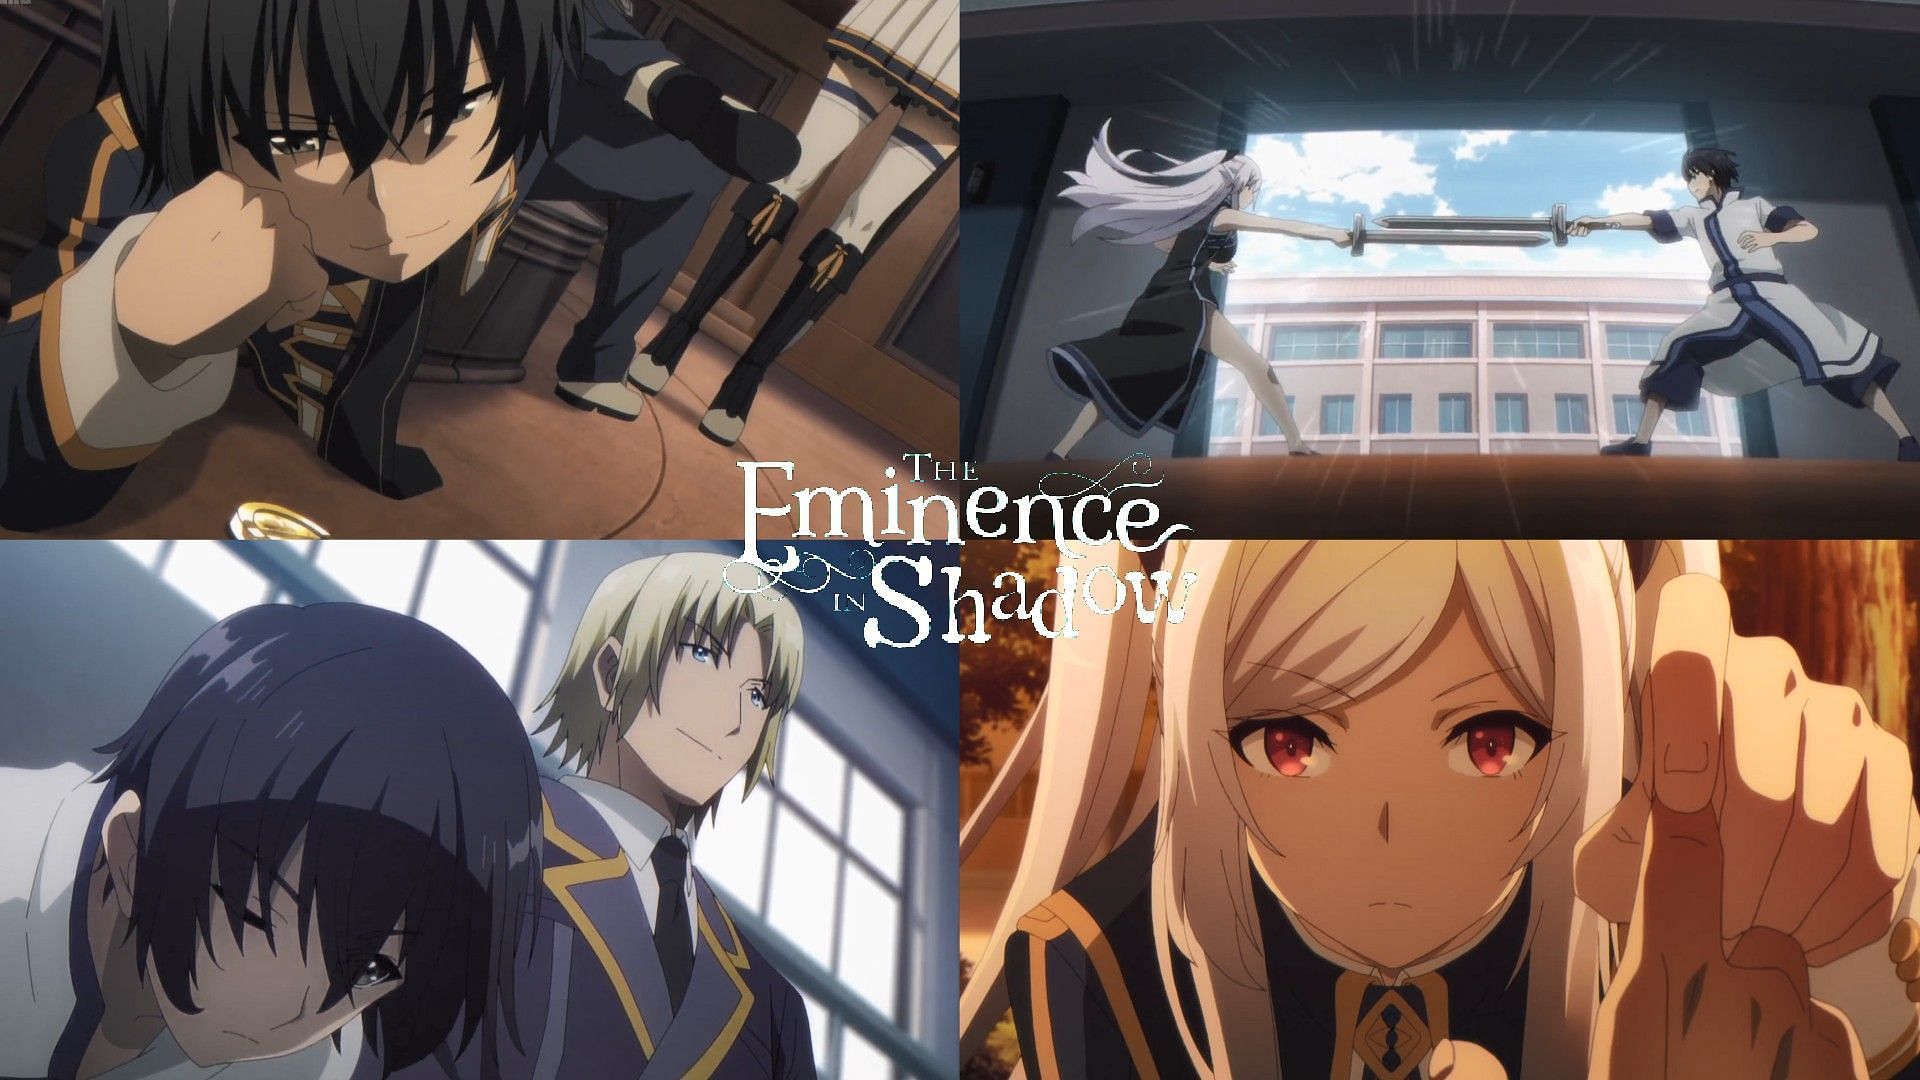 Cid woke up and chose violence [The Eminence in Shadow] : r/anime